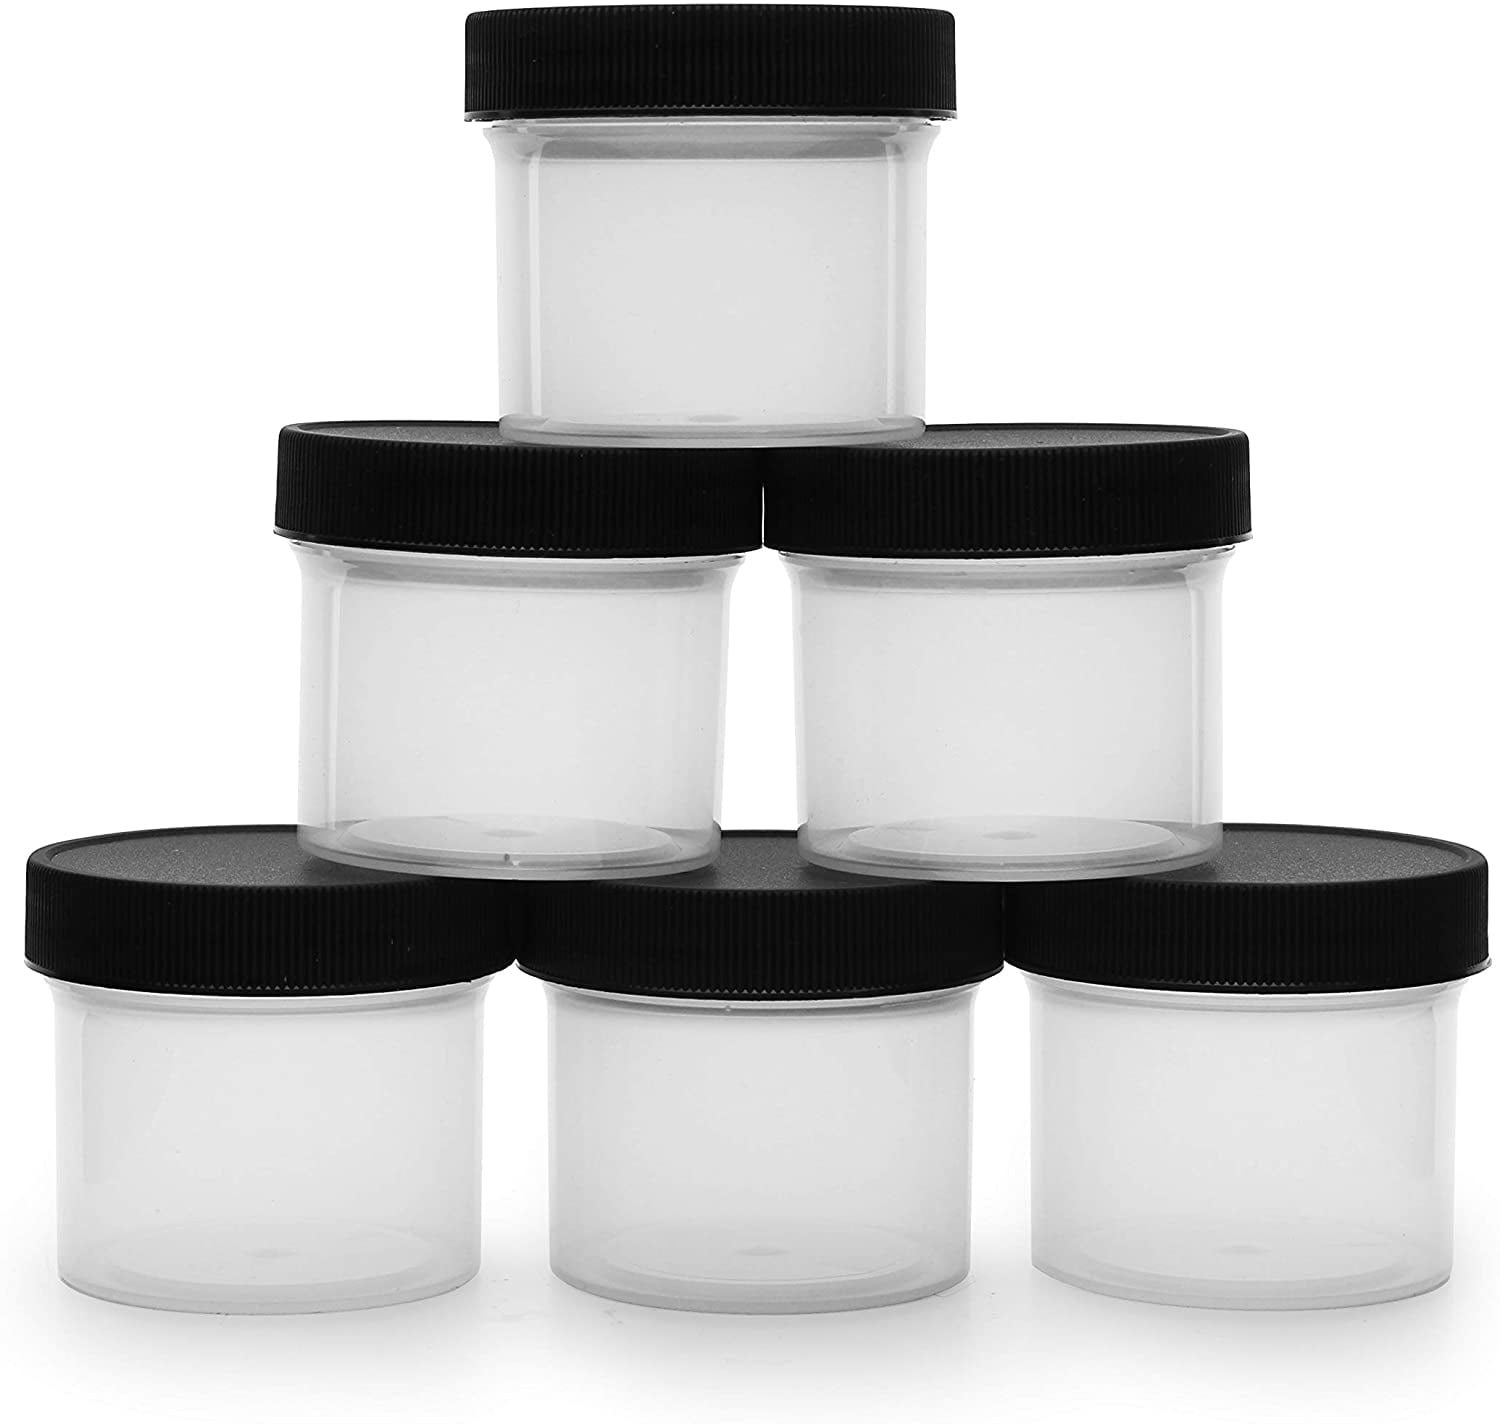  VITEVER [6 Pack] Salad Dressing Container To Go, 1.7 oz Glass  Small Condiment Container with Lids, Dipping Sauce Cups Set, Leakproof  Reusable Sauce Containers for Lunch Box Work Trip.: Home 